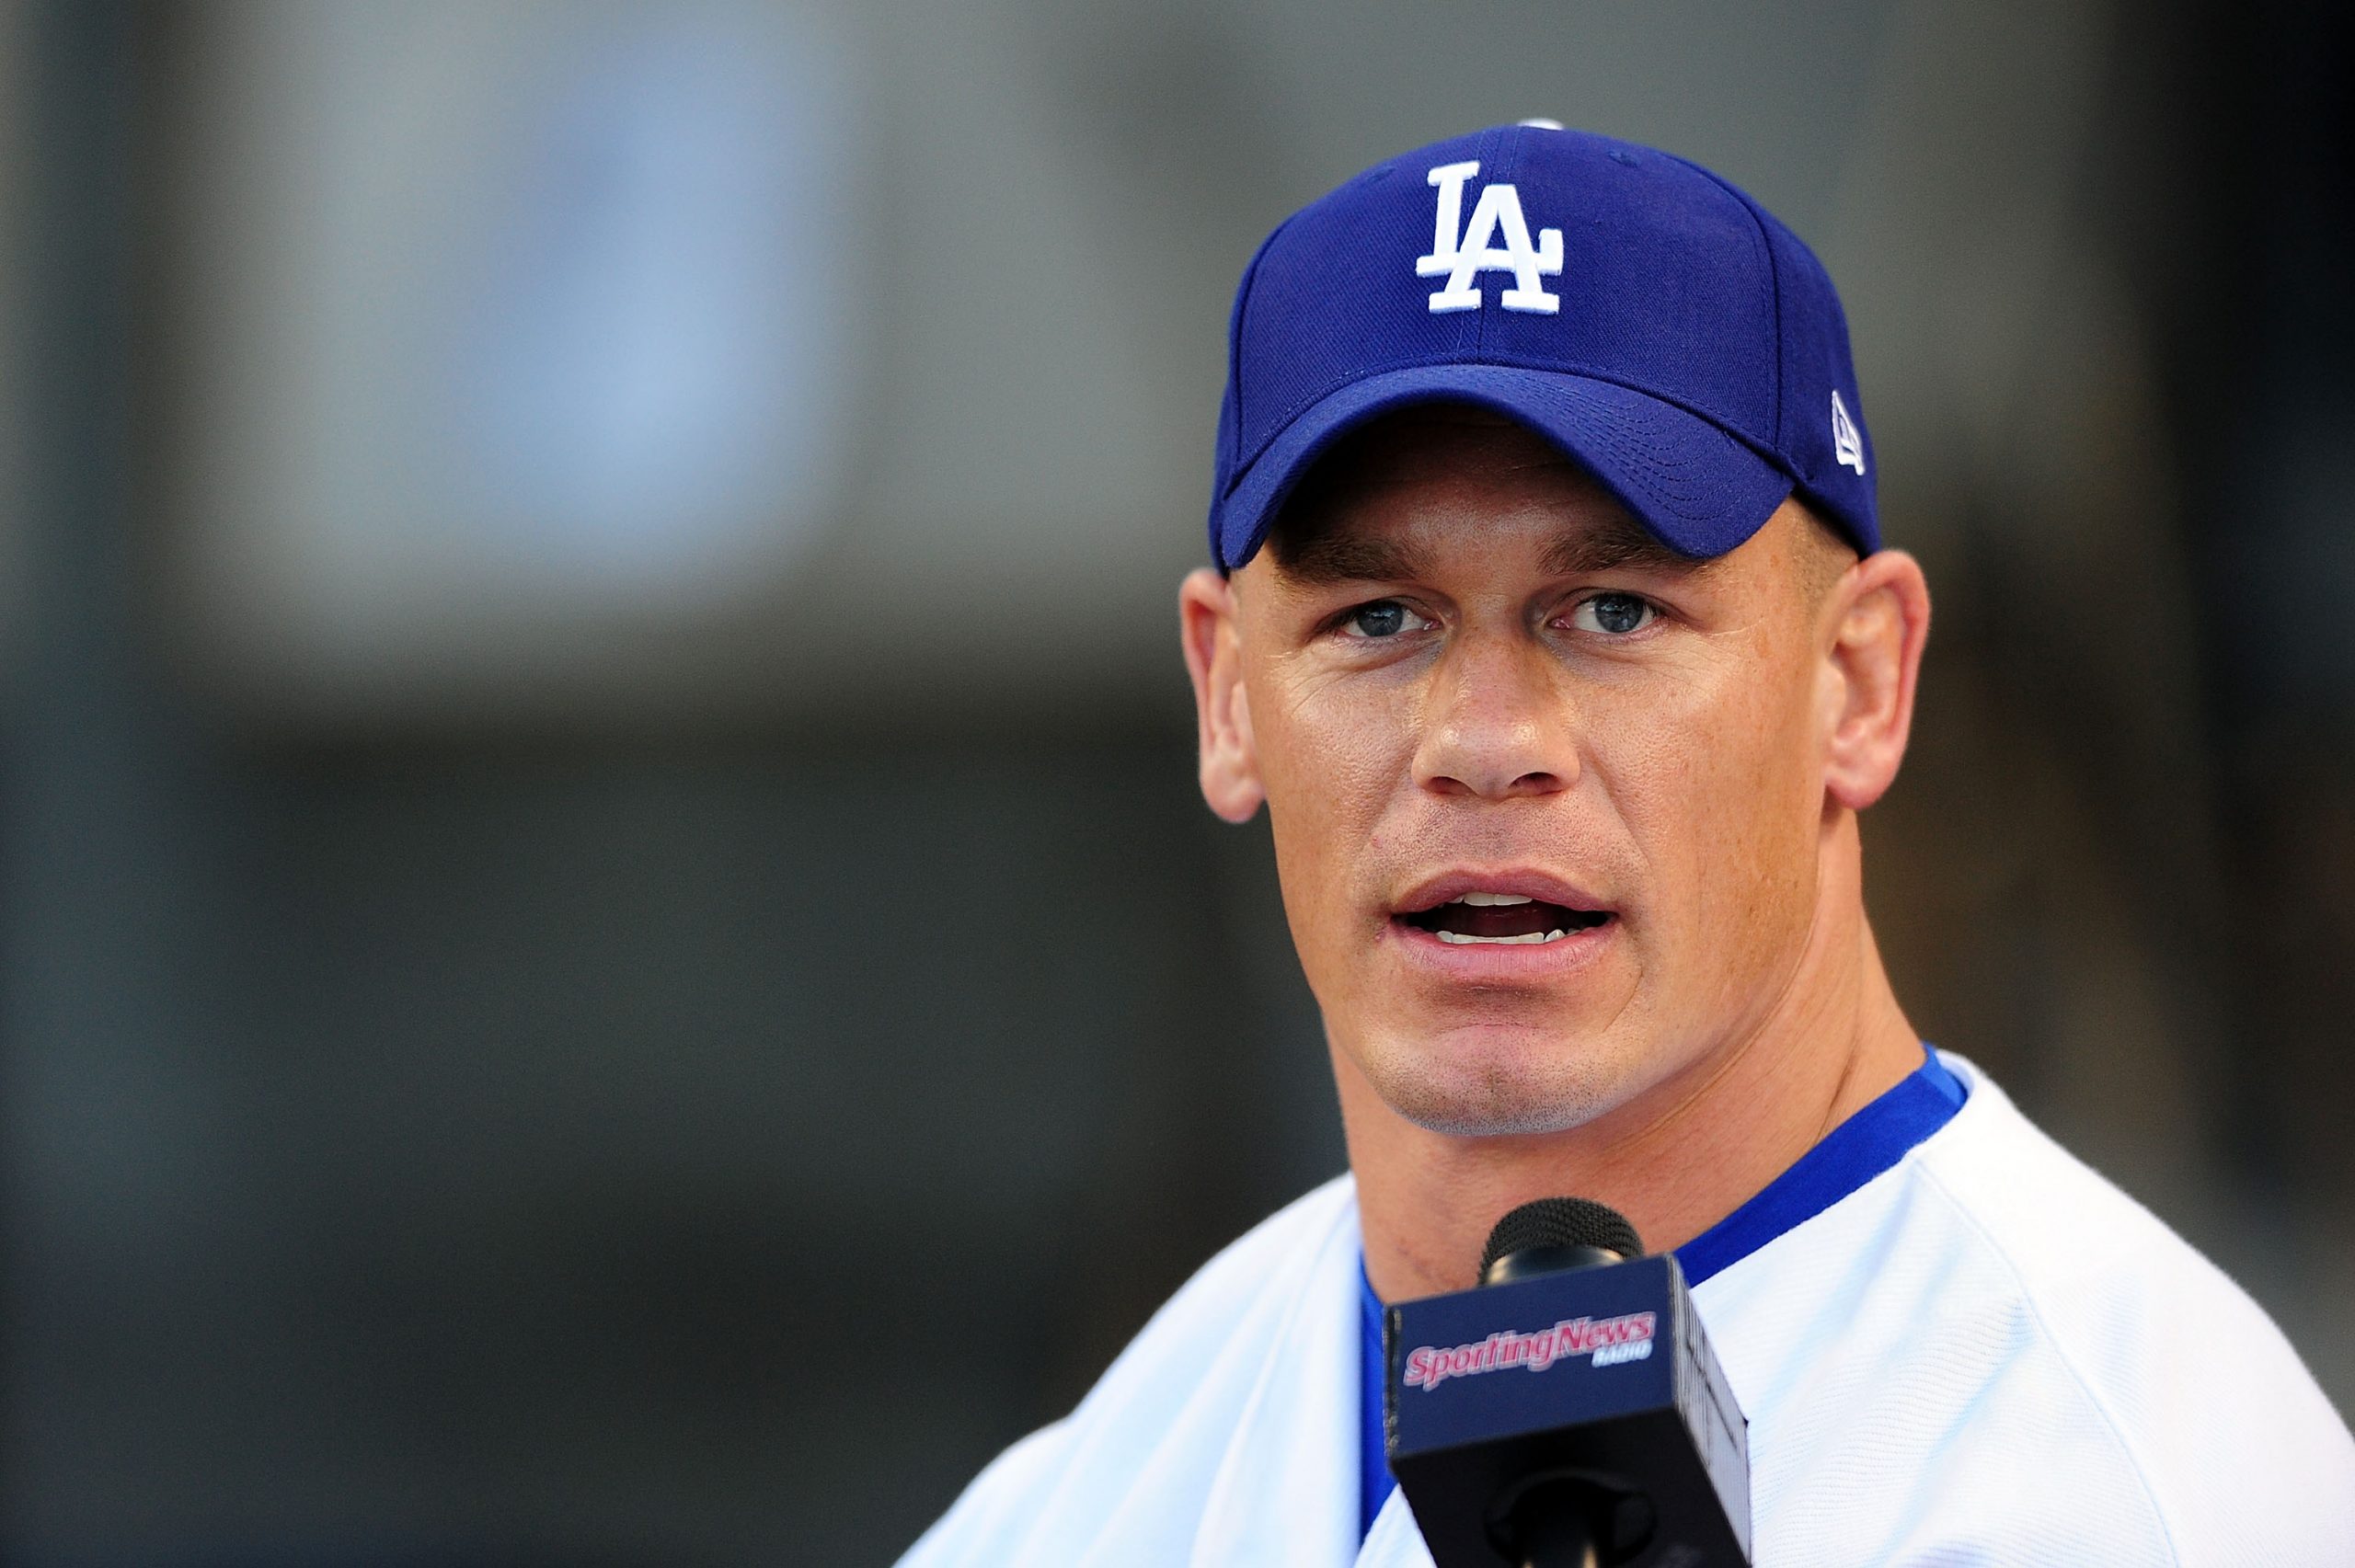 How much is the net worth of John Cena? Learn more about WWE legend